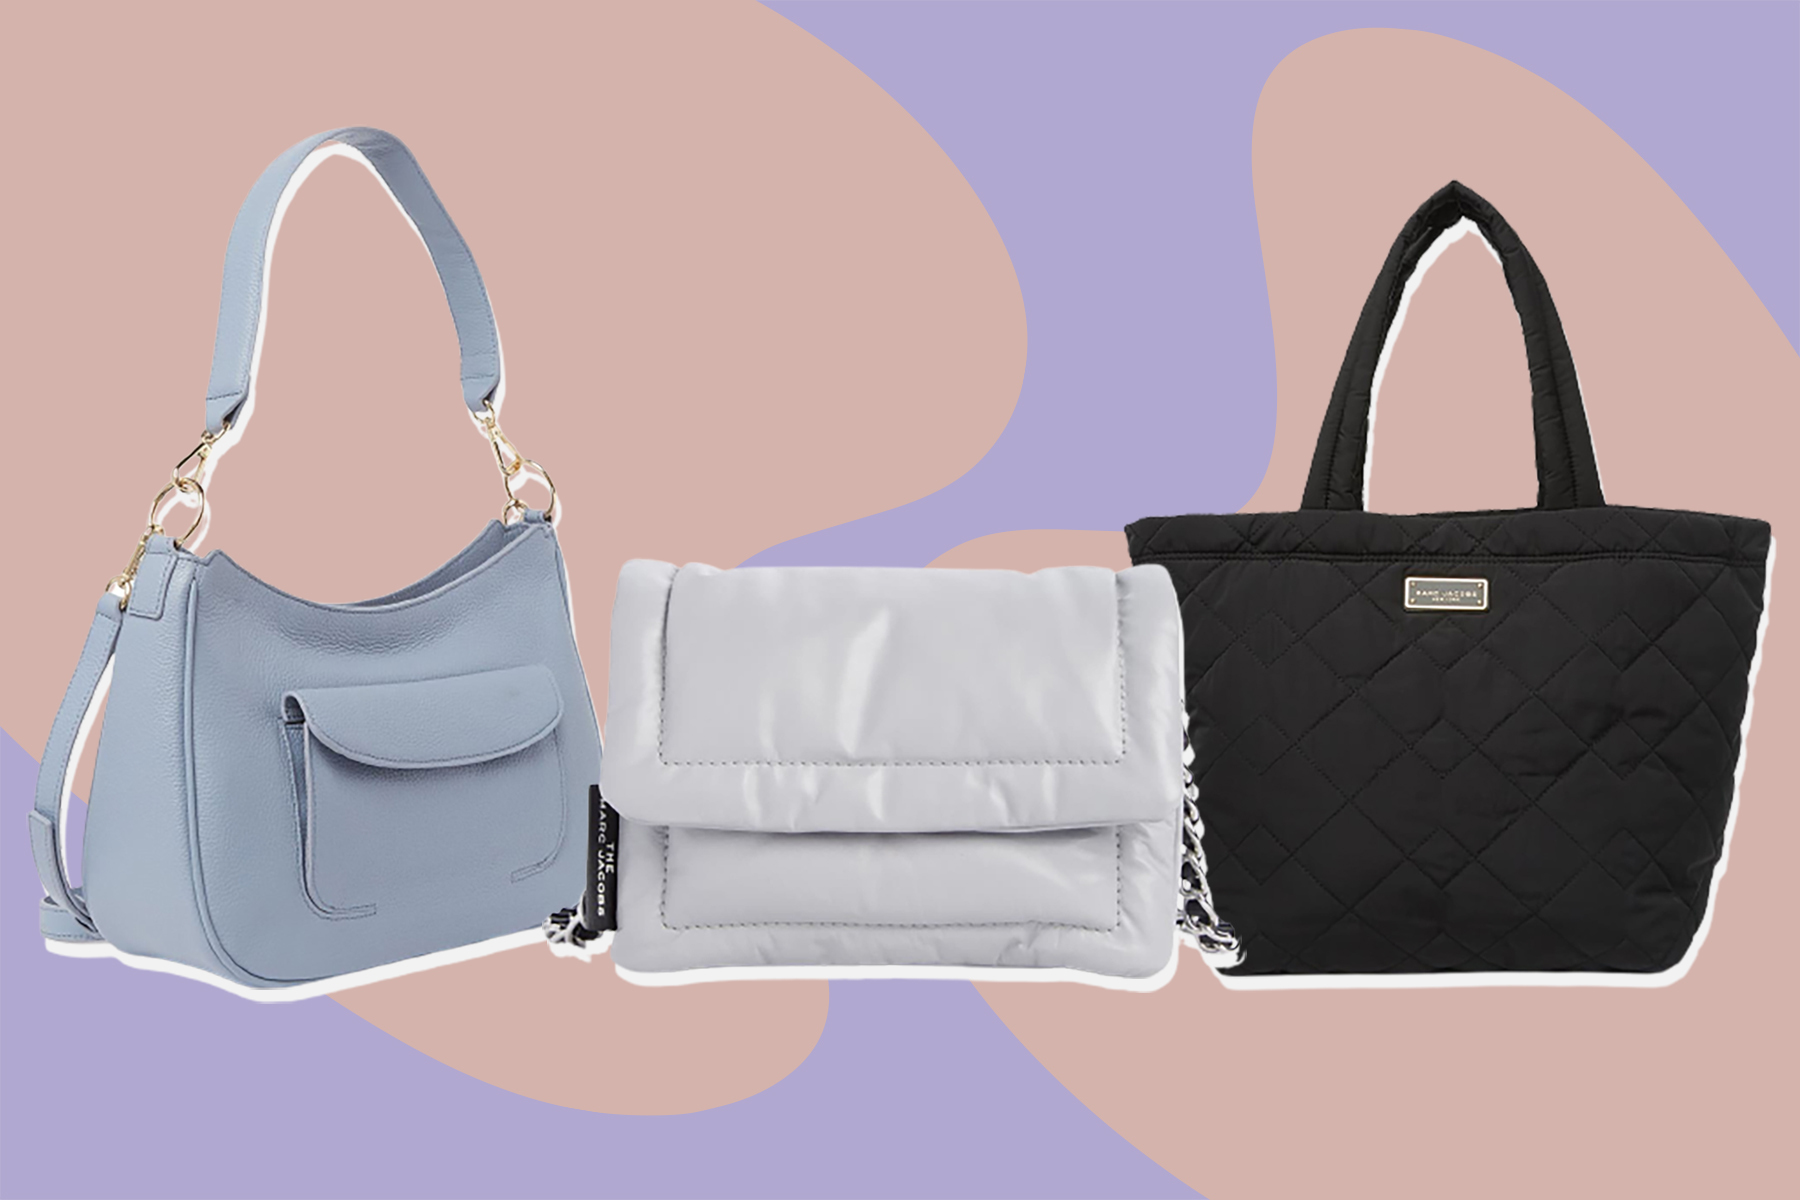 Nordstrom Rack Has Kate Spade Bags on Sale for Up to 66% Off